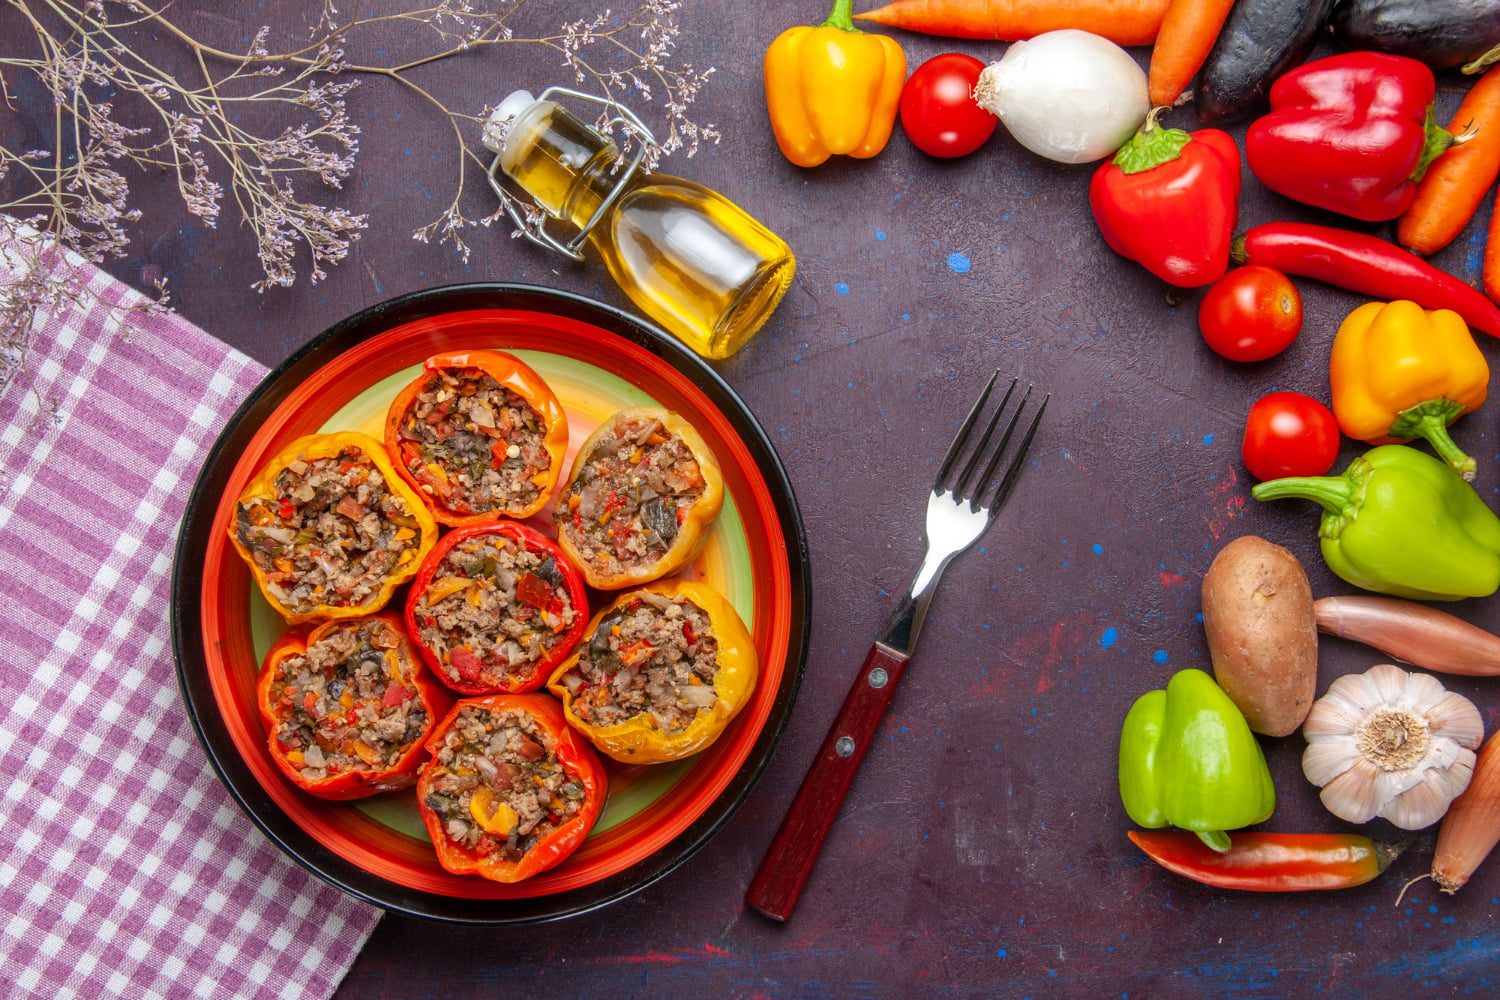 Recipe for Peppers Stuffed With Minced Chicken and Rice